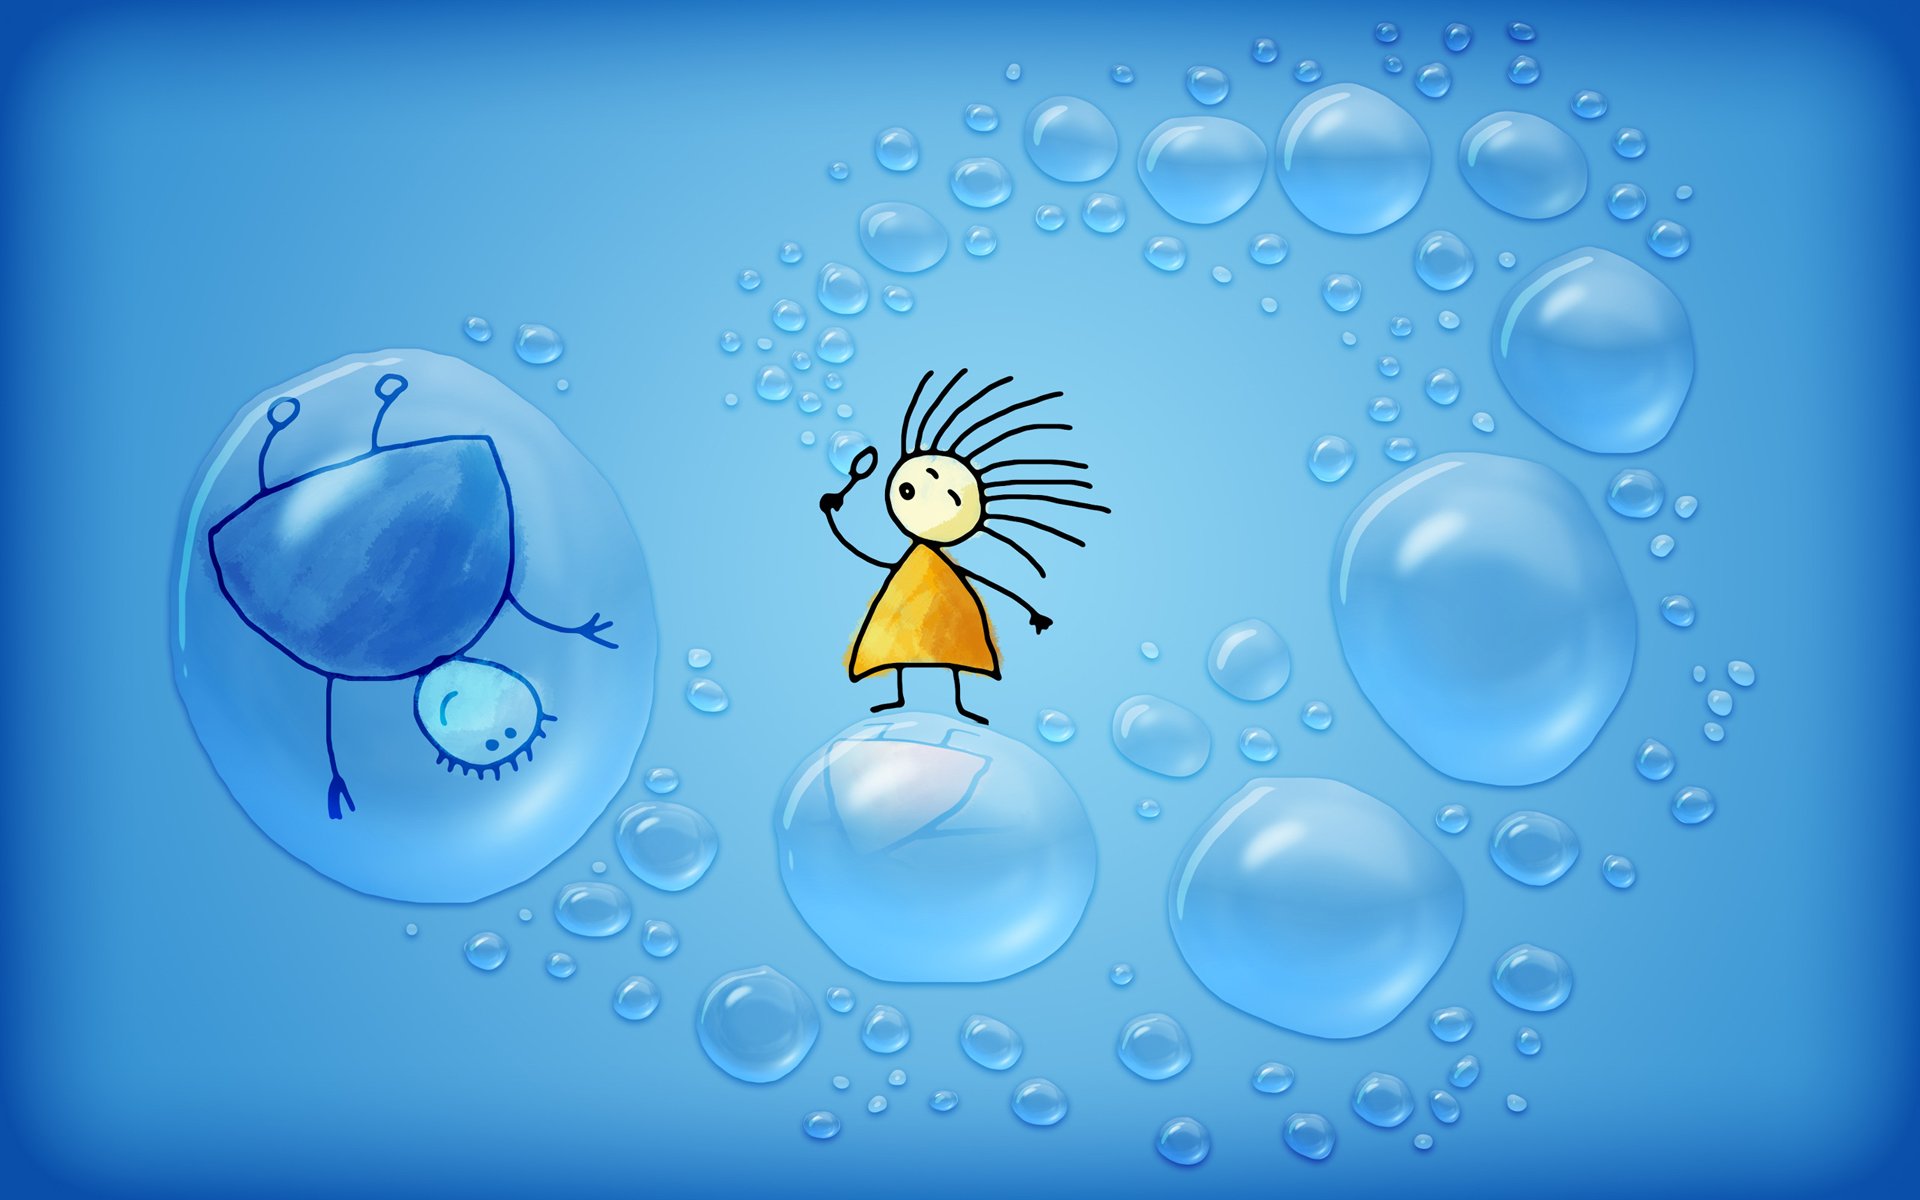 Bubbles Cute Animation Hd Wallpapers New Animated Desktop ...